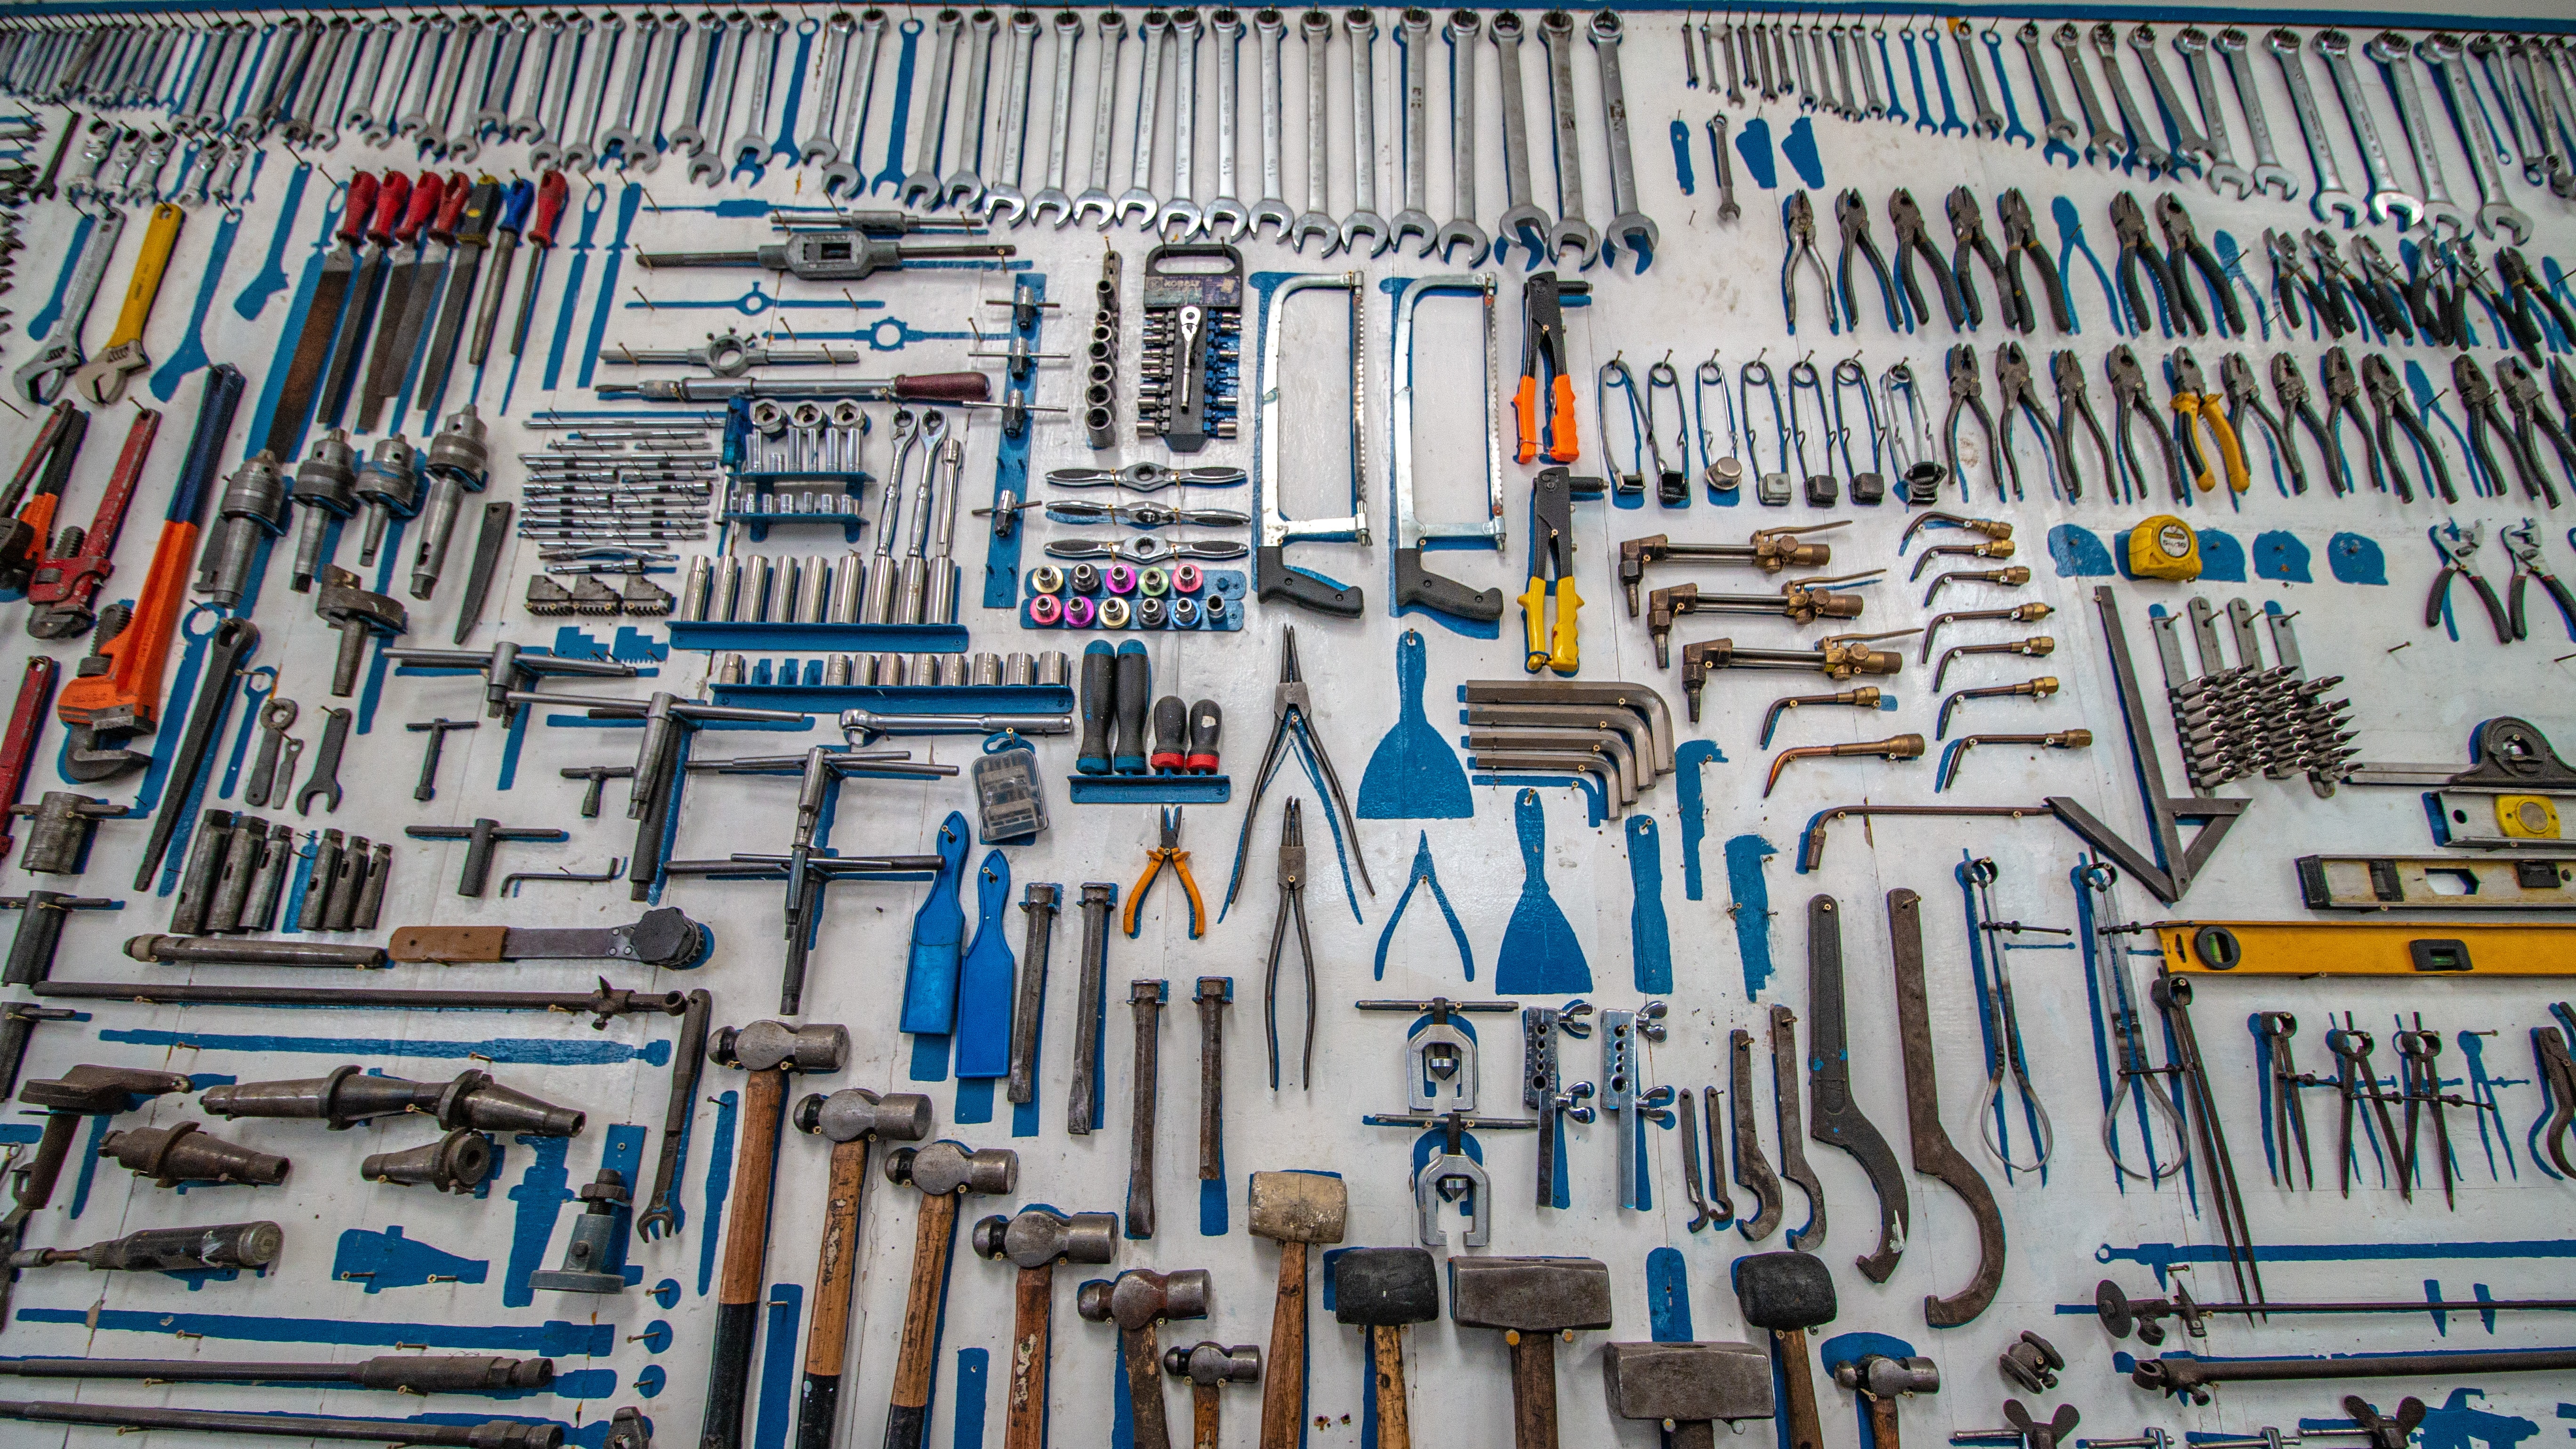 A picture of many tools on a white surface.